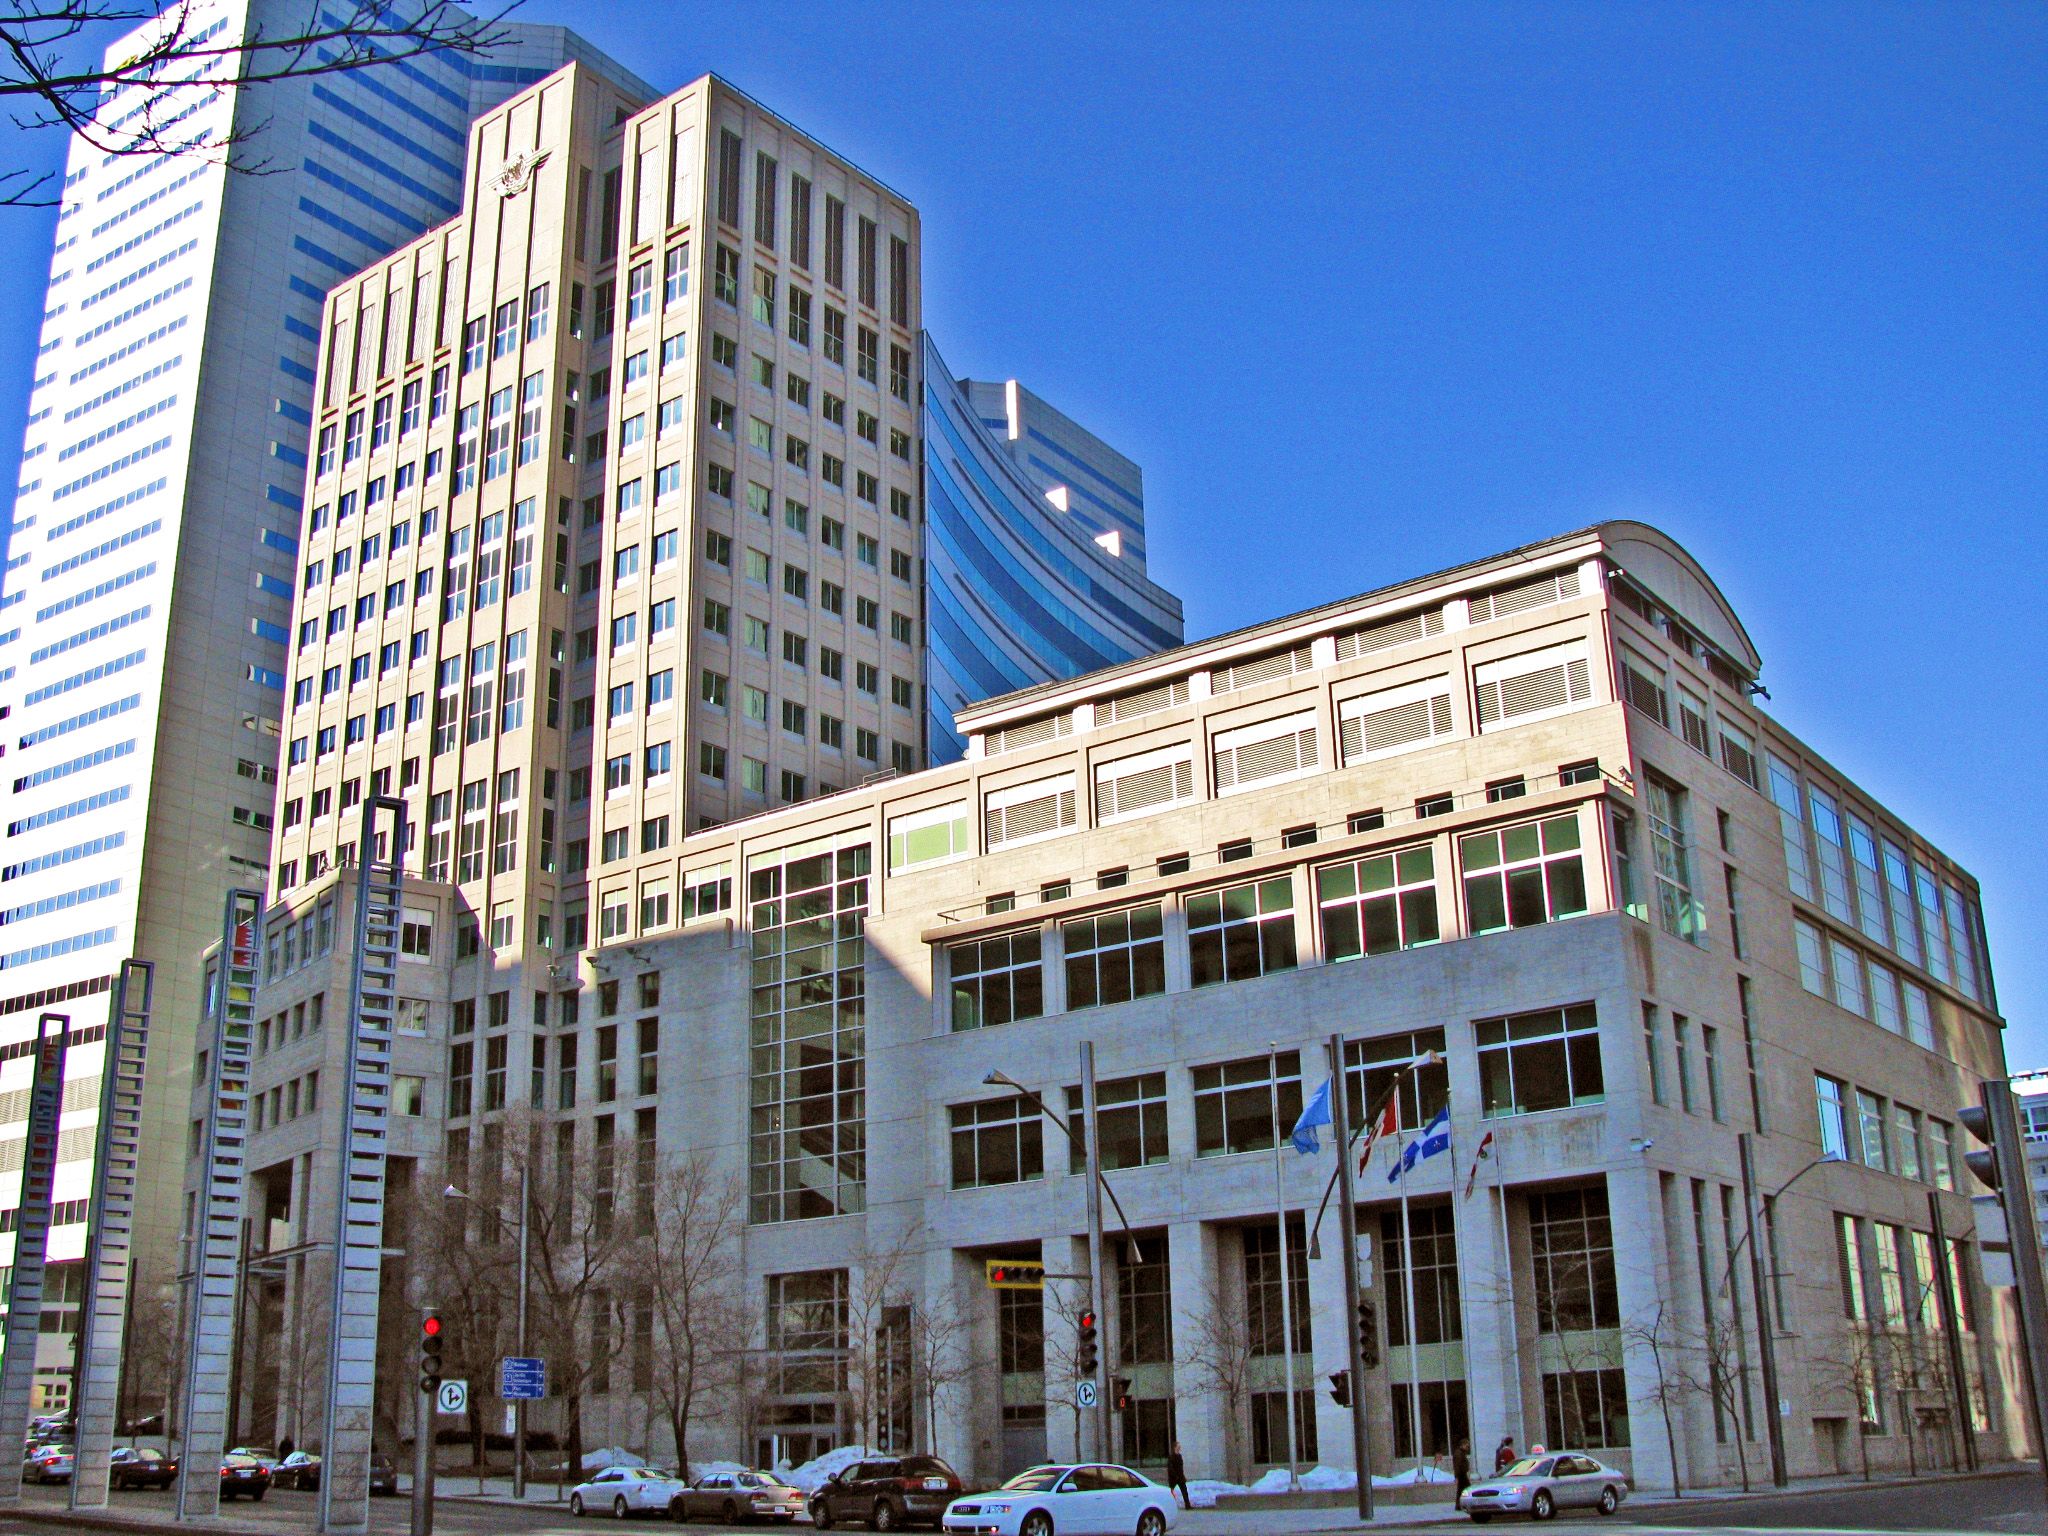 ICAO's world headquarters in Montreal, Canada